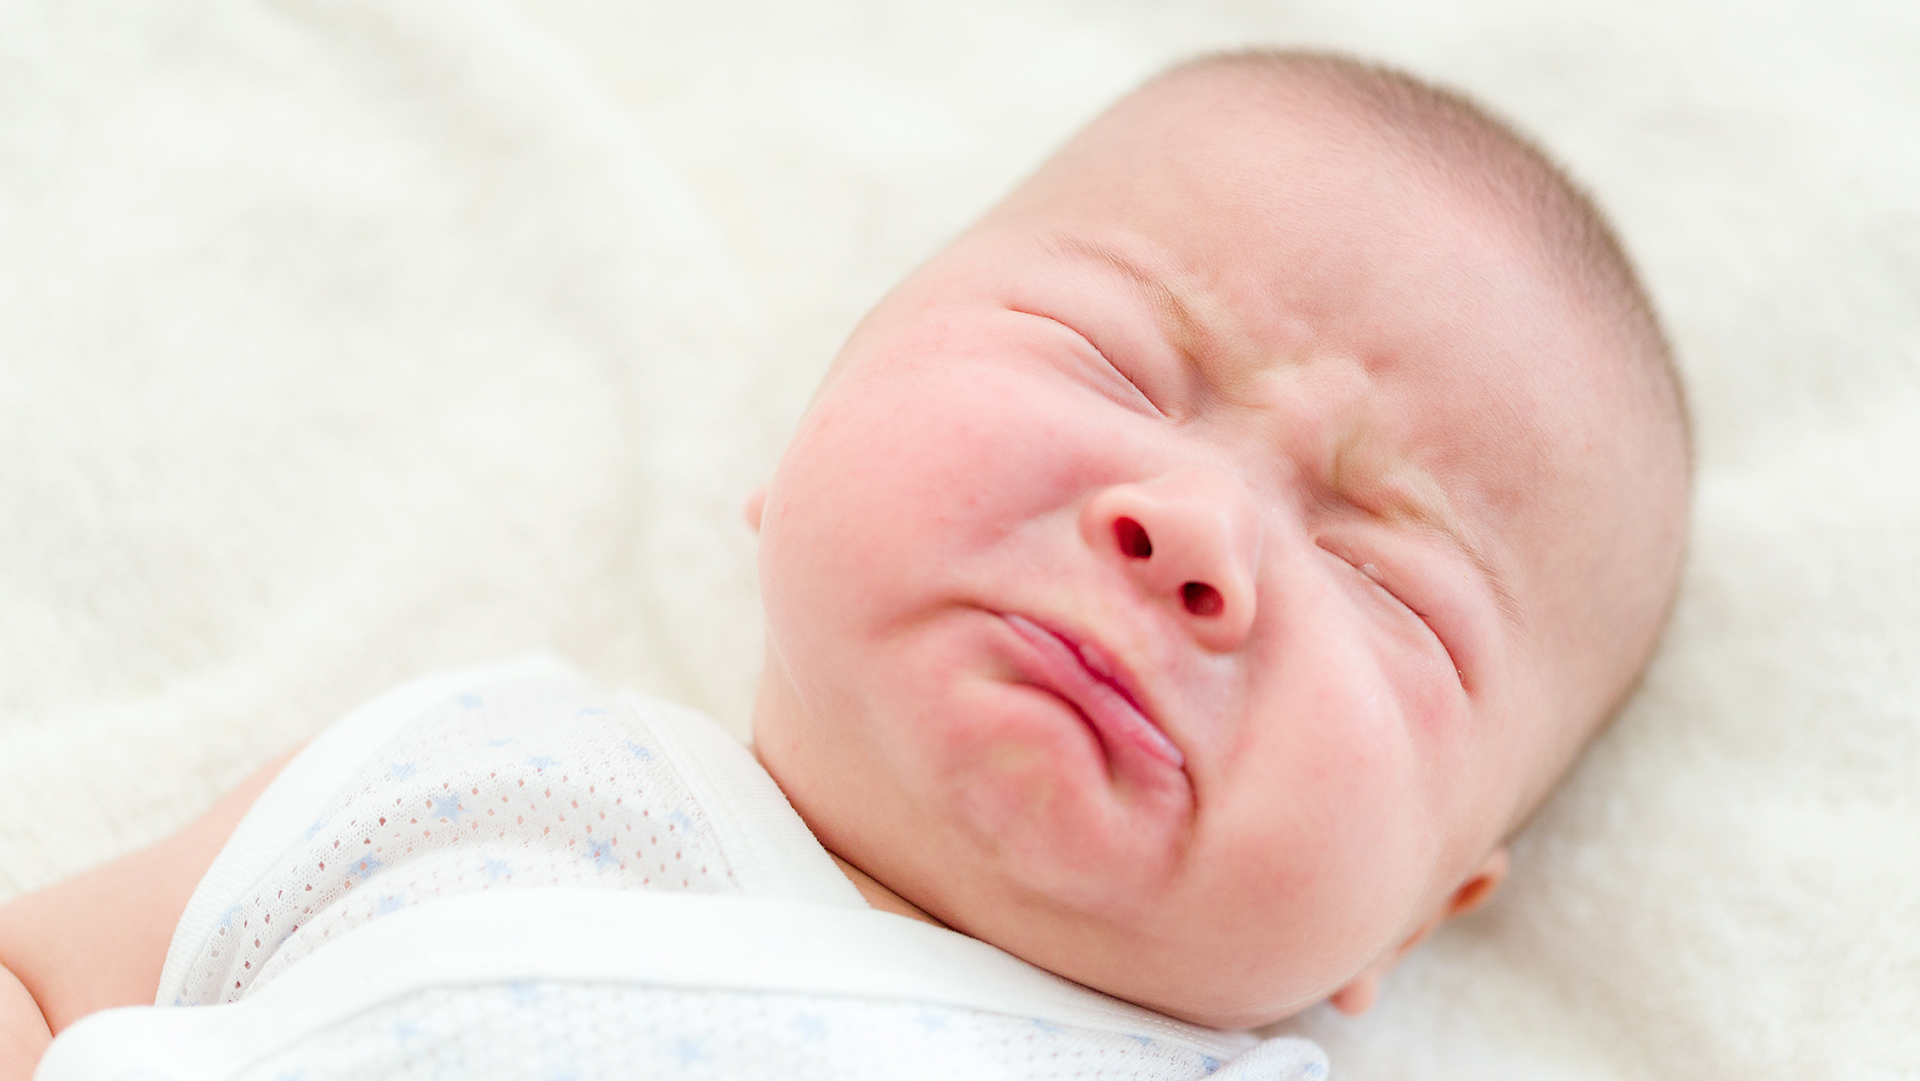 Why Don't Newborns Have Tears or Sweat? | Live Science